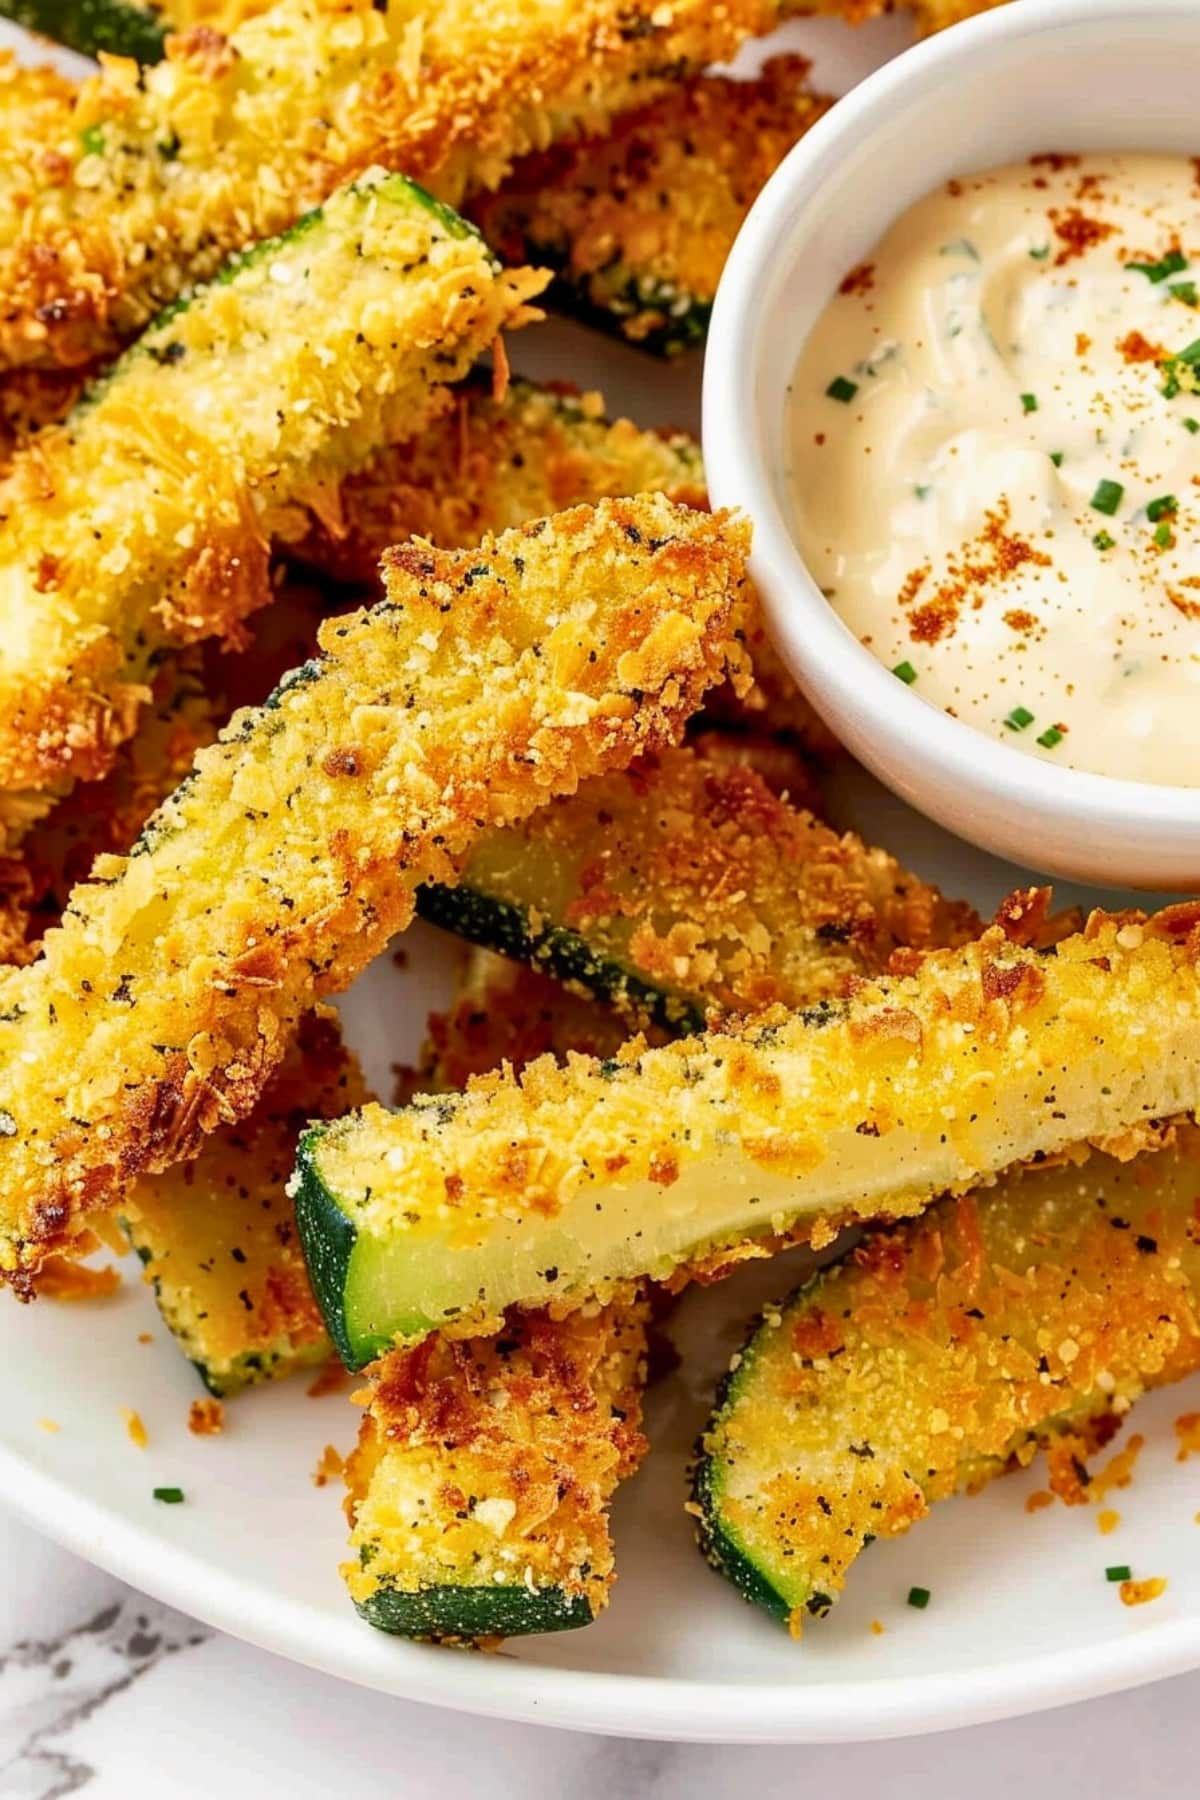 Zucchini fries served in a white plate with dip.